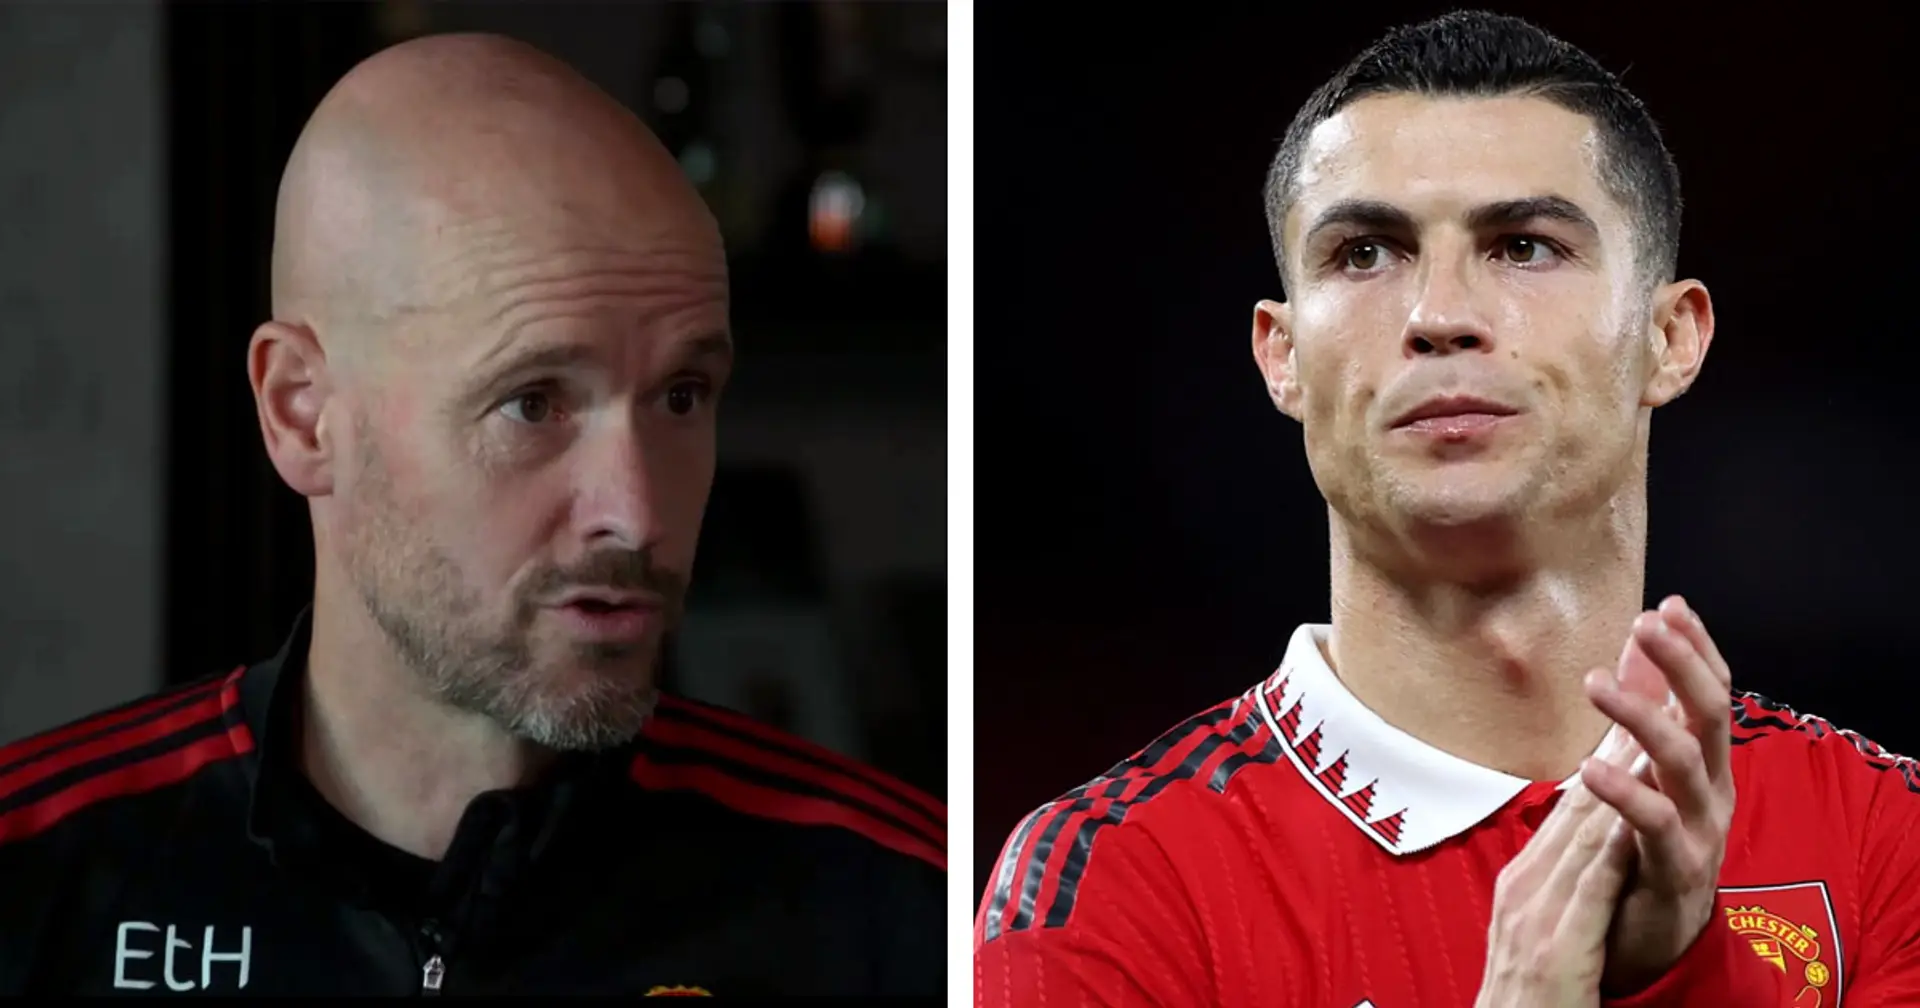 'I've given enough explanation': Ten Hag breaks silence on if Ronaldo apologized for Spurs walkout